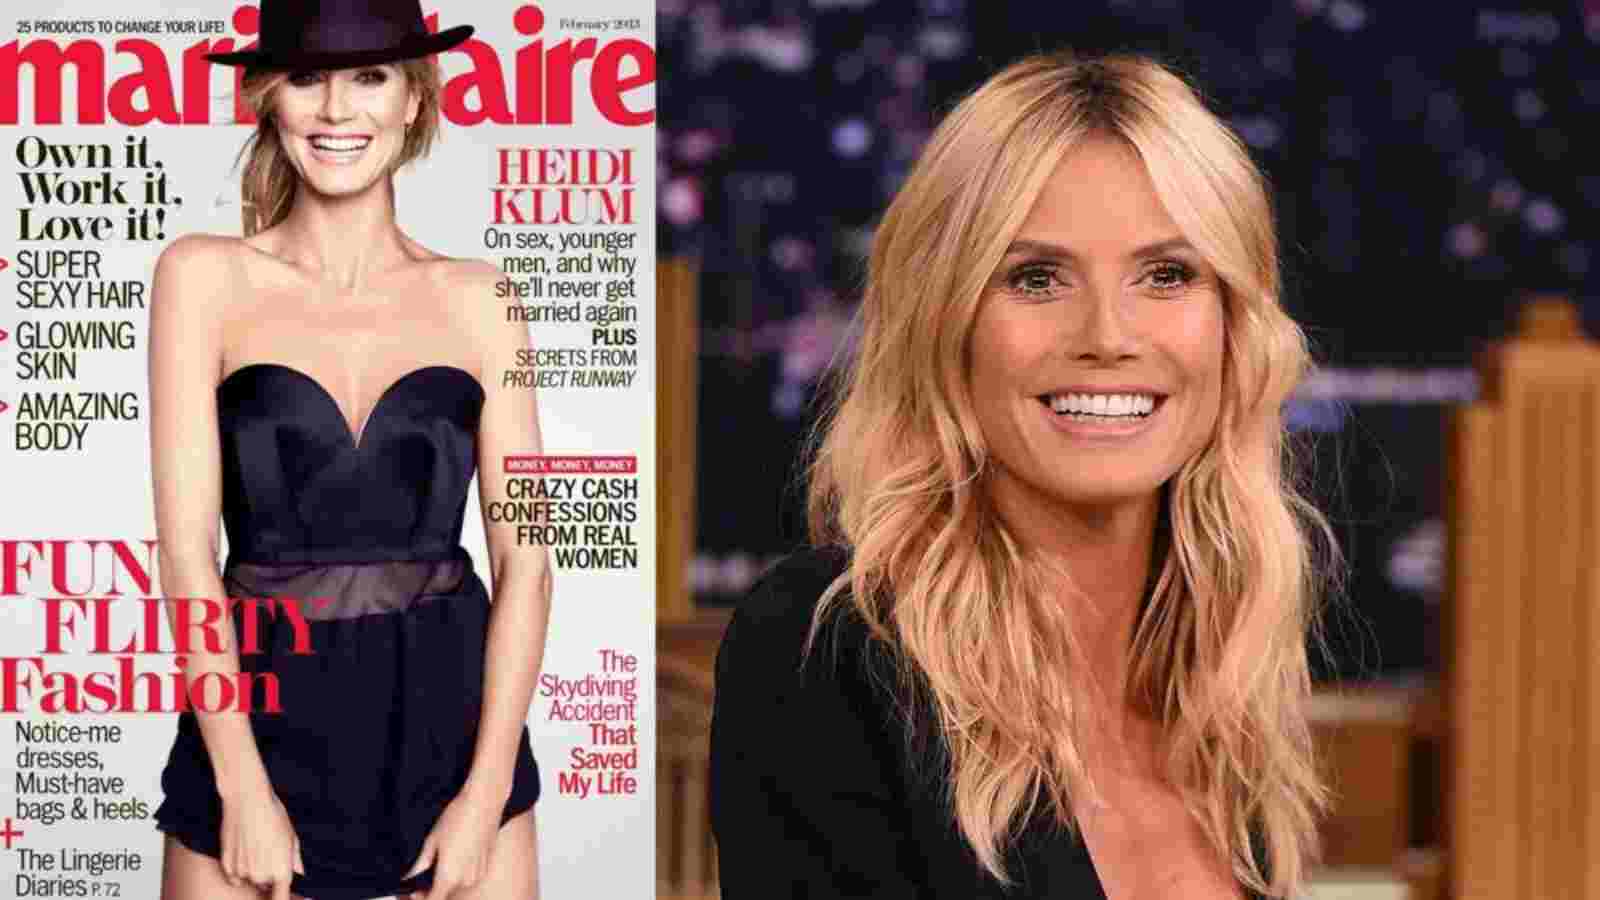 Heidi Klum discussed about how she makes her sex life interesting 